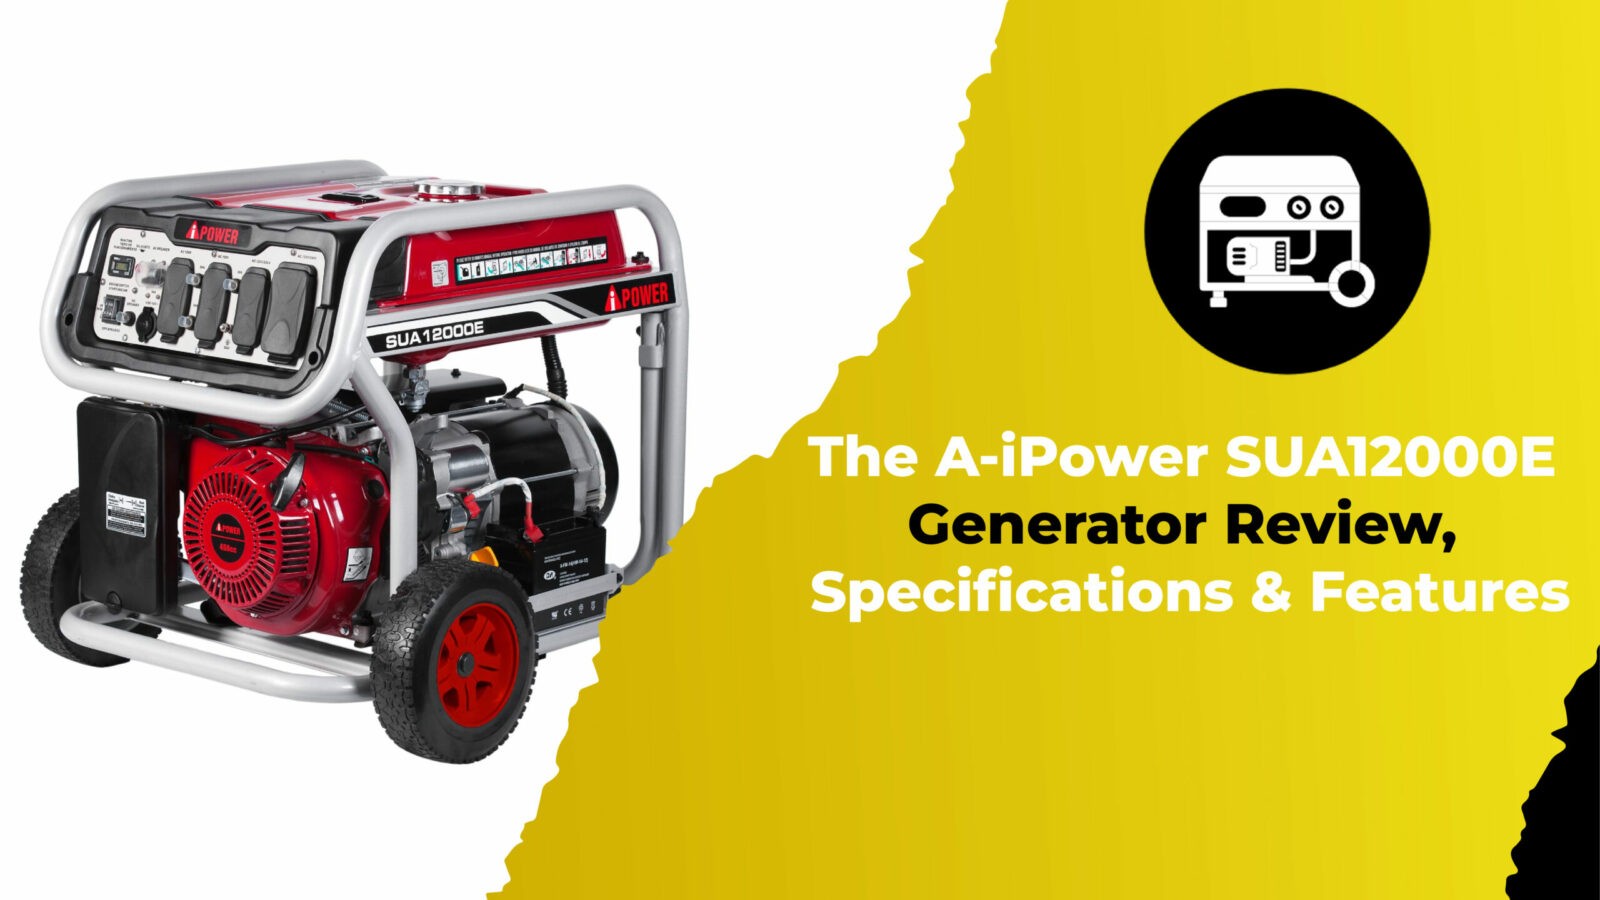 The A-iPower SUA12000E Generator Review, Specifications & Features